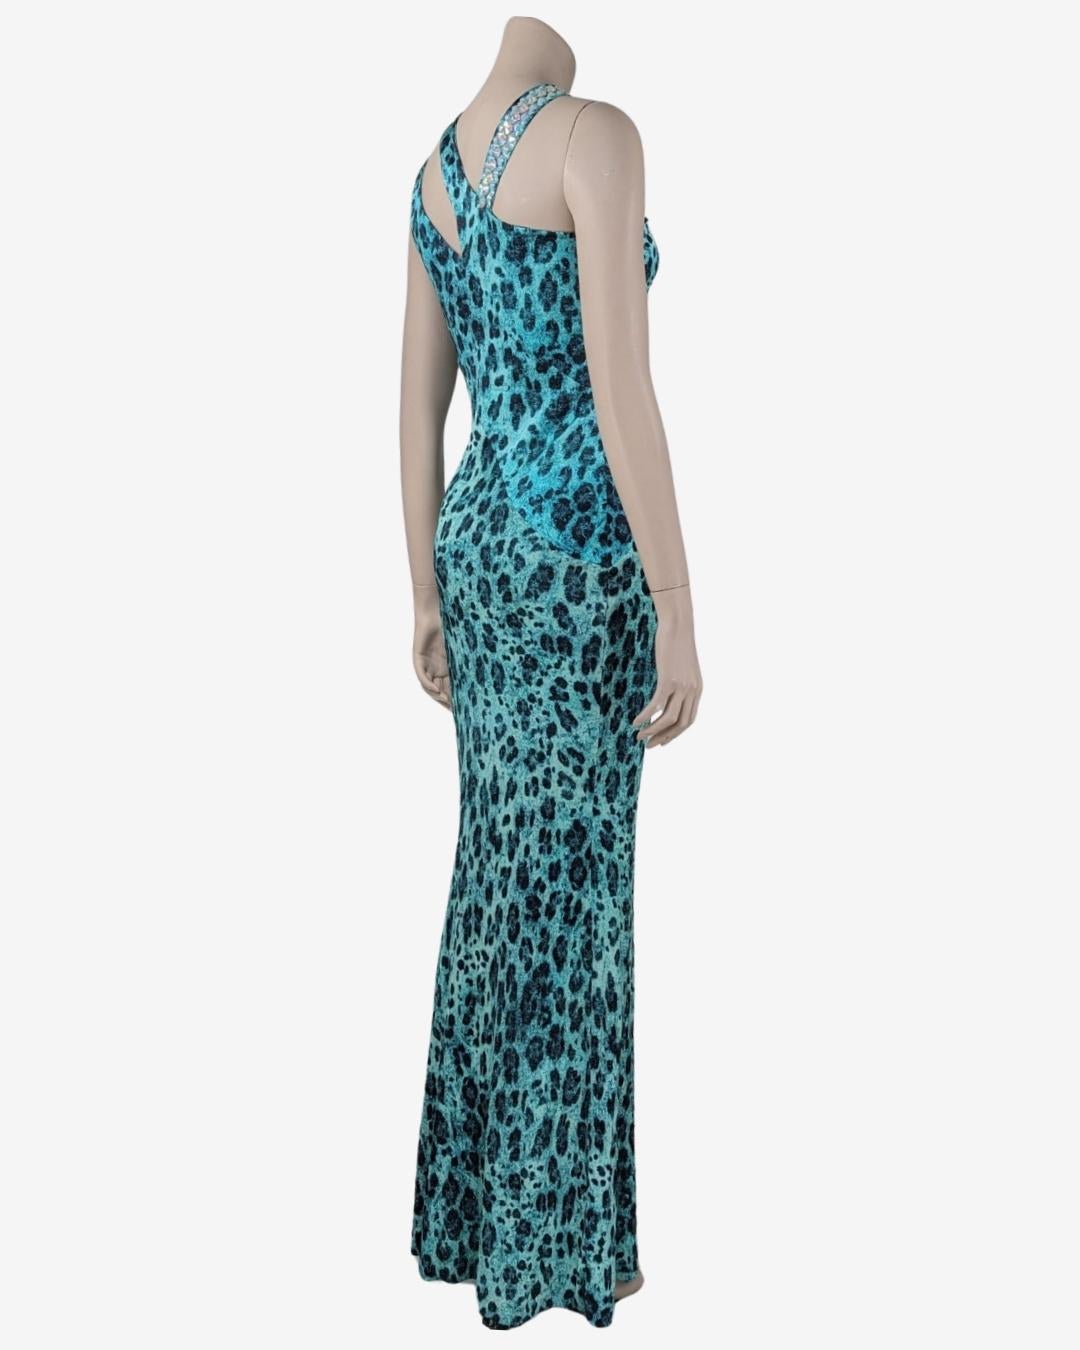 Animal print all-over maxi dress from the Fall 2012 Collection For Sale 2